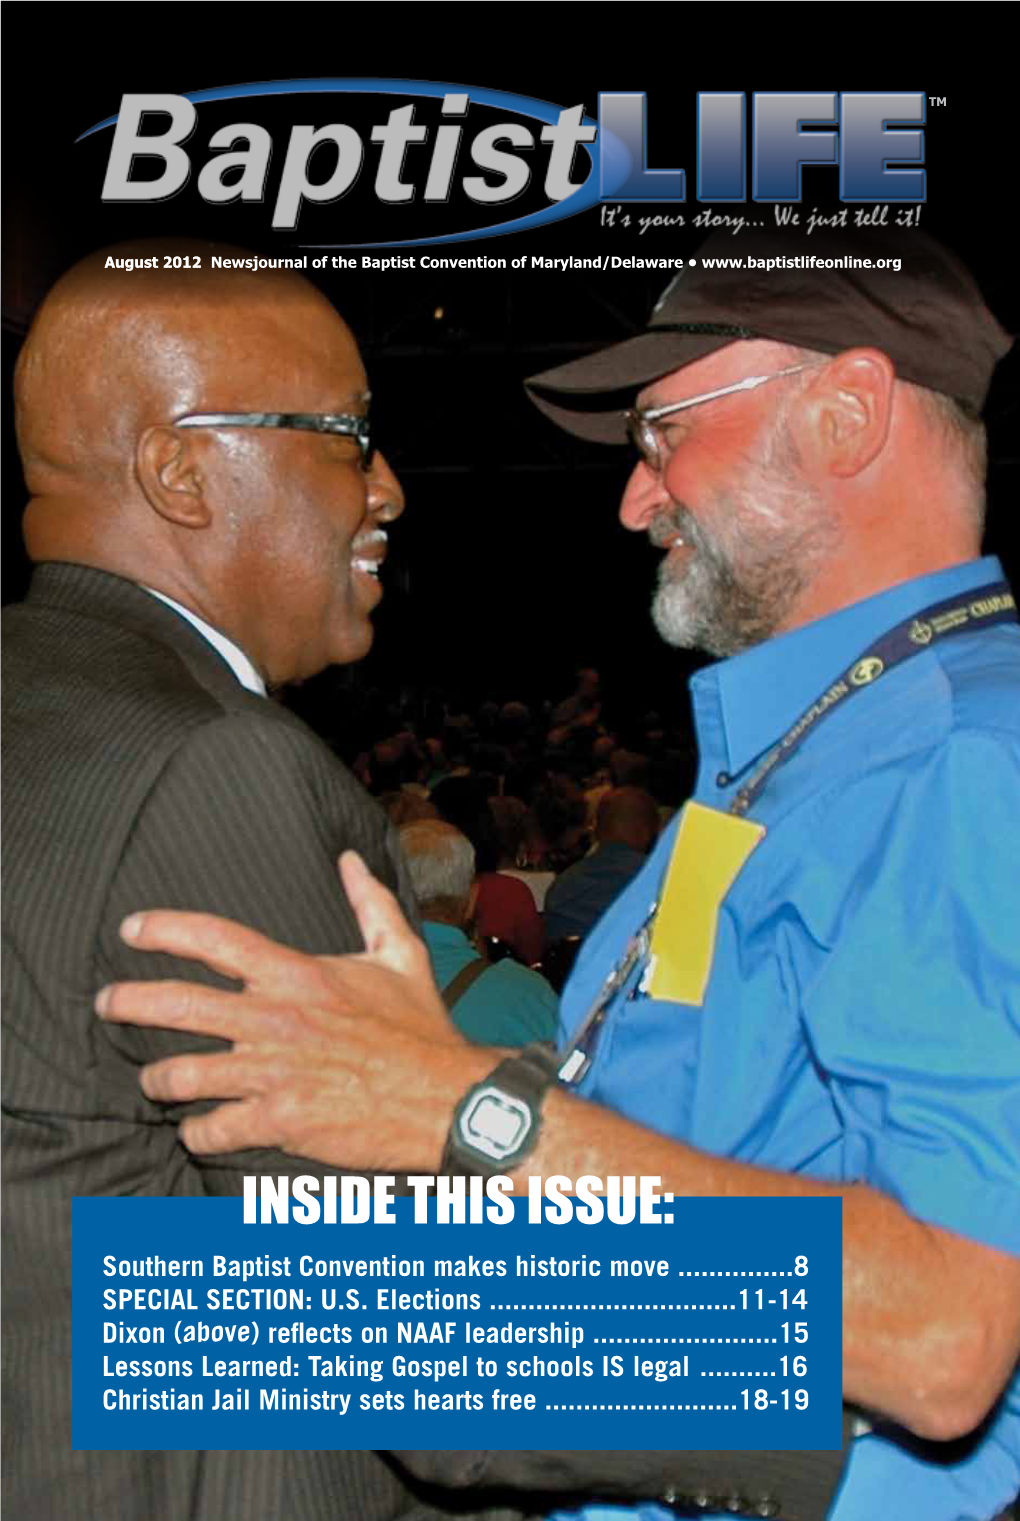 INSIDE THIS ISSUE: Southern Baptist Convention Makes Historic Move